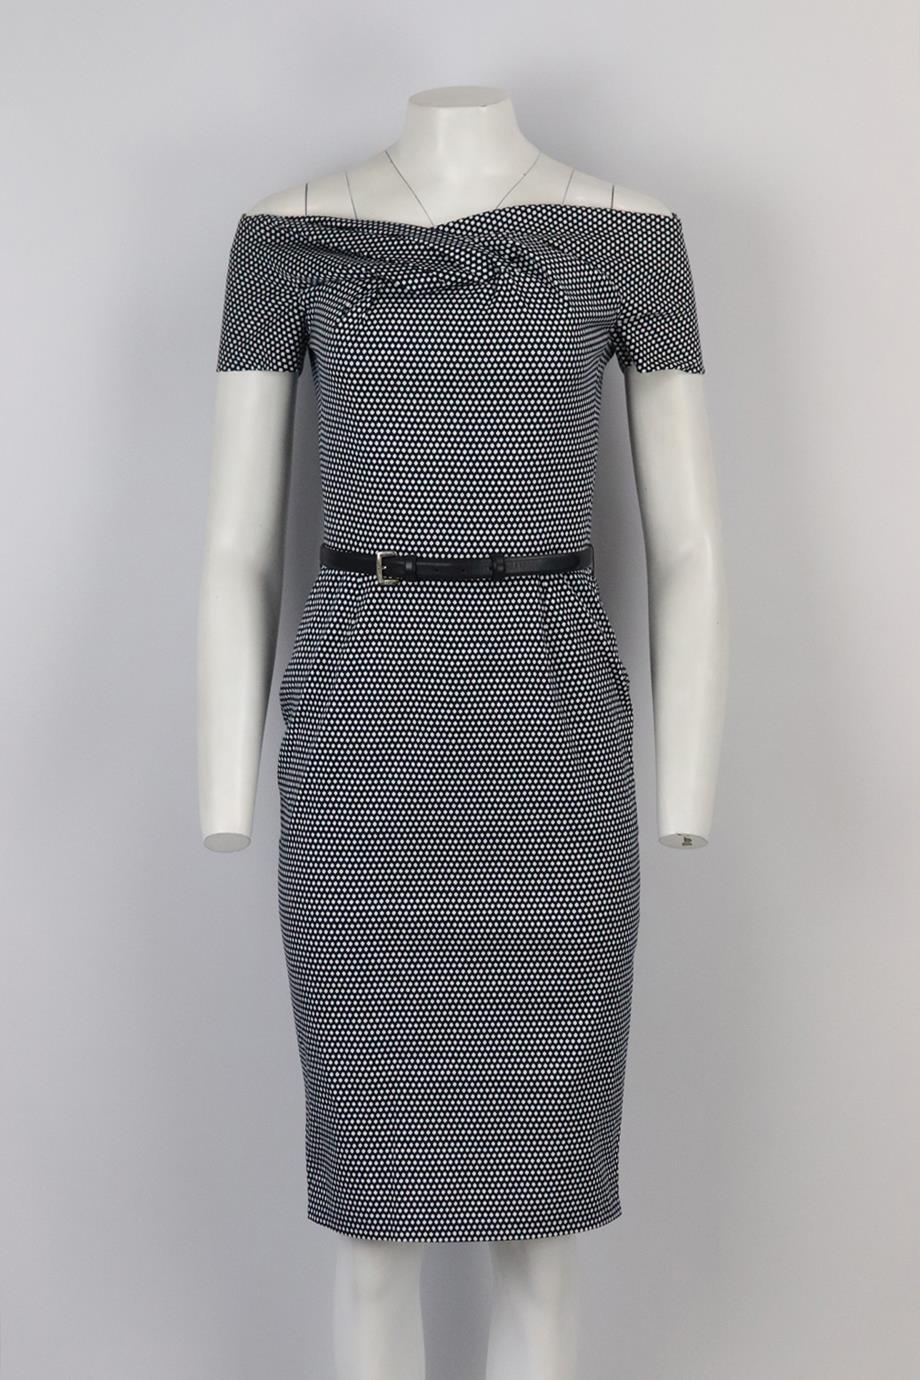 Christian Dior belted off the shoulder printed stretch cotton midi dress. Navy and white. Short sleeve, off-the-shoulder. Zip fastening at back. 97% Cotton, 3% elastane; lining: 75% cotton, 17% polyamide, 8% elastane. Size: FR 38 (UK 10, US 6, IT